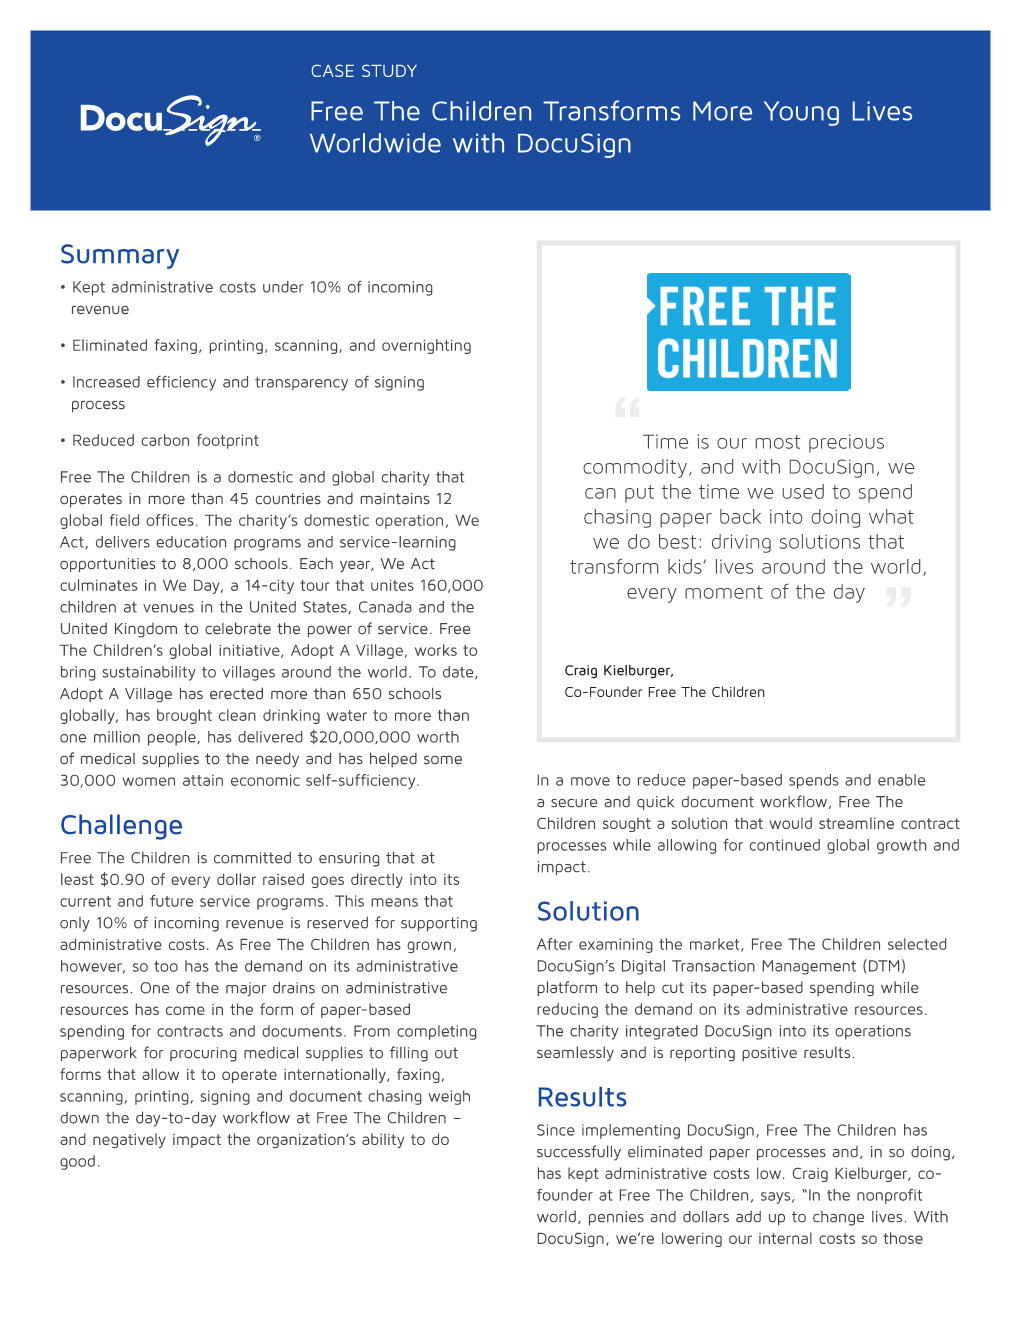 Free the Children Transforms More Young Lives Worldwide with Docusign